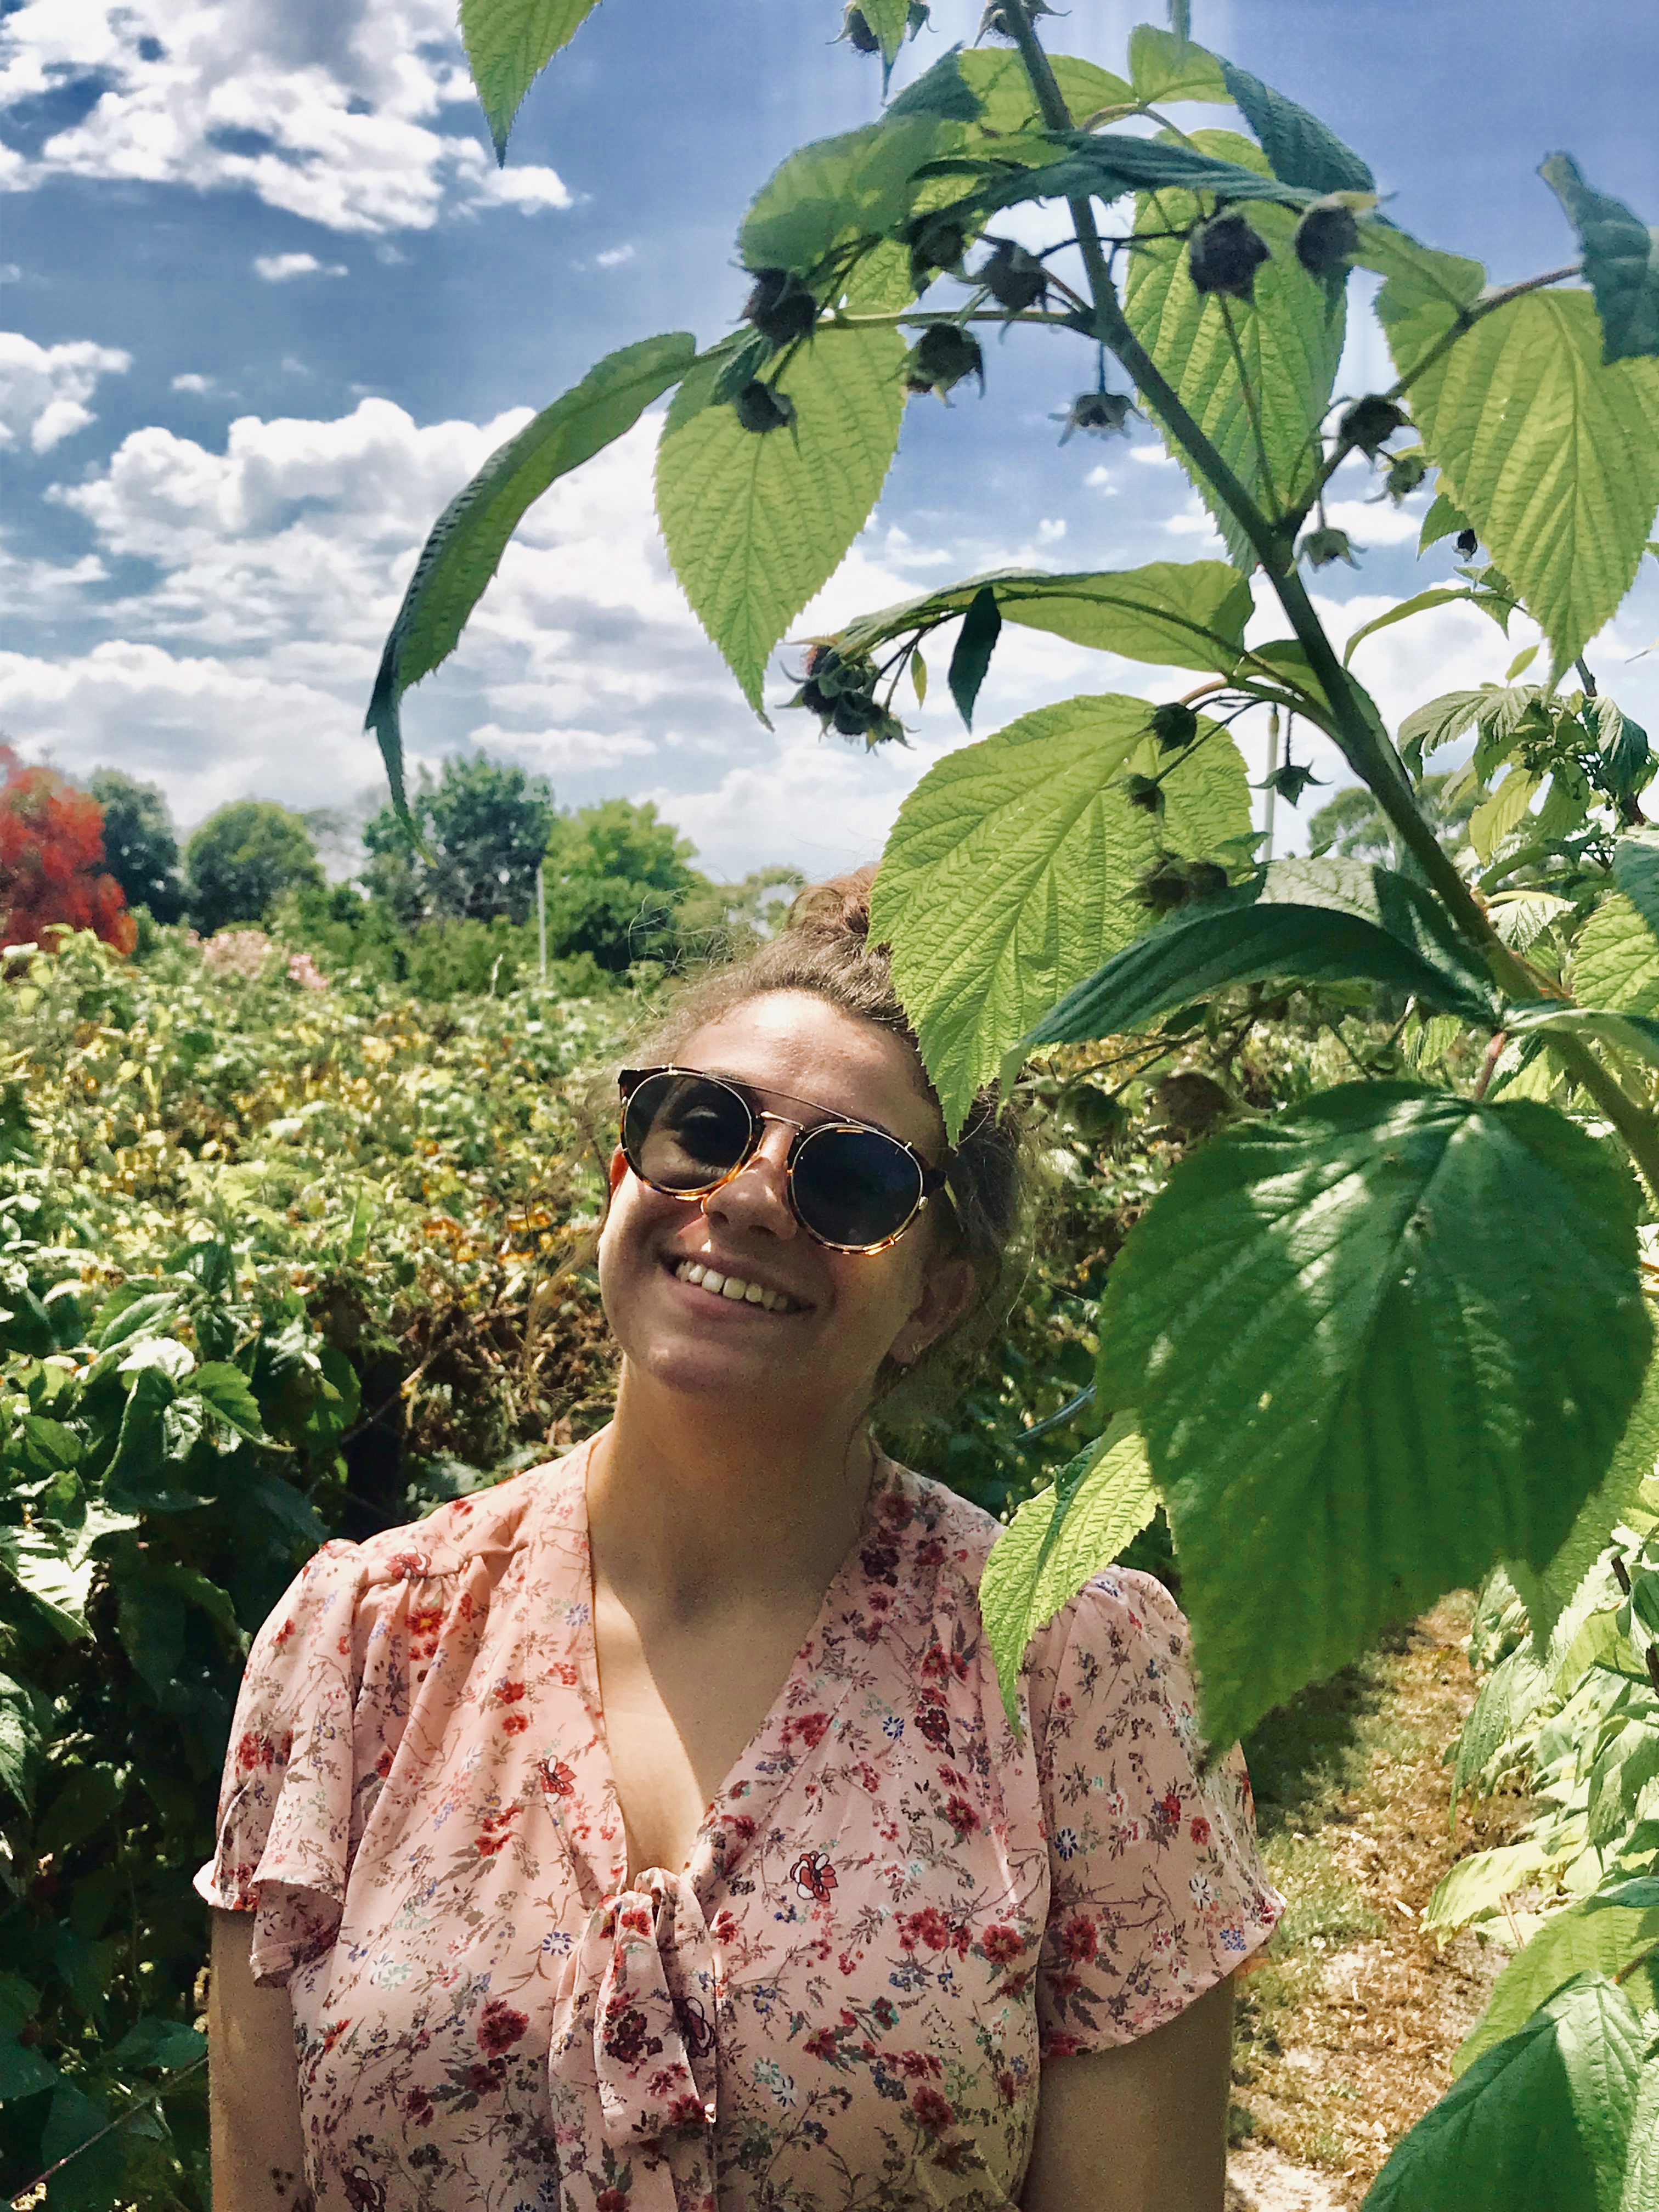 Yasmin is standing in a field of sunflowers, smiling at the sky in a pink shirt